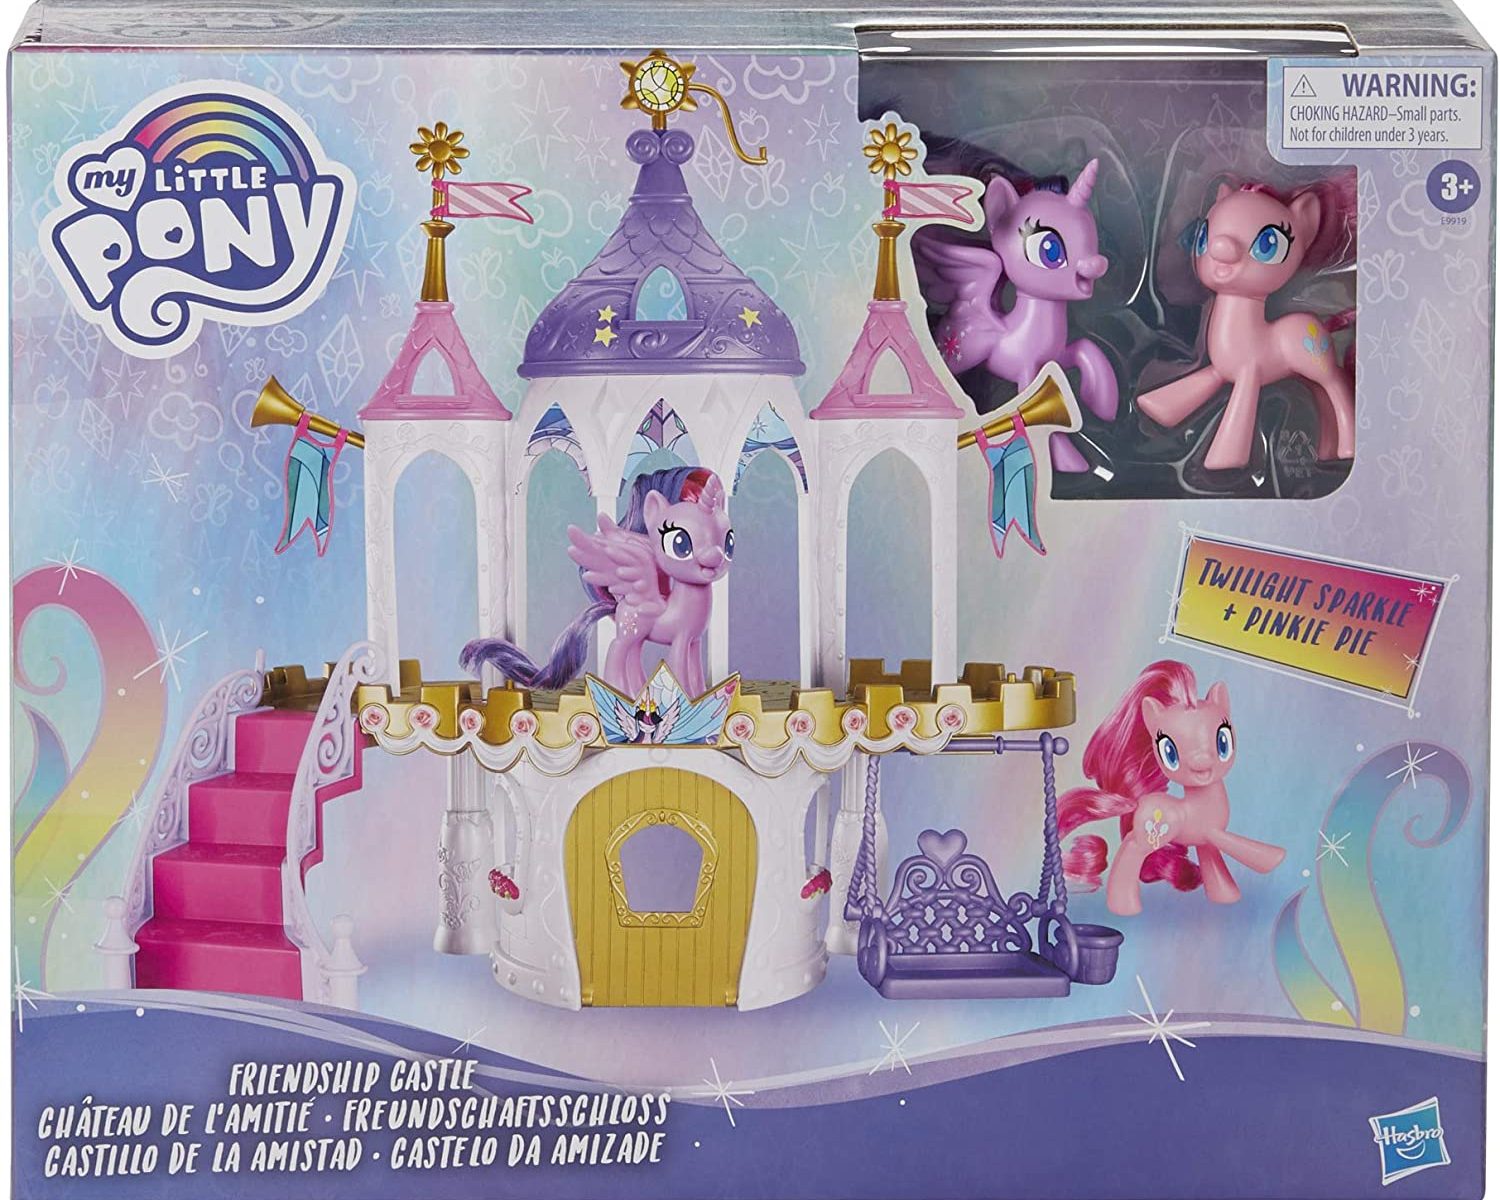 new-my-little-pony-friendship-castle-play-set-available-now-my